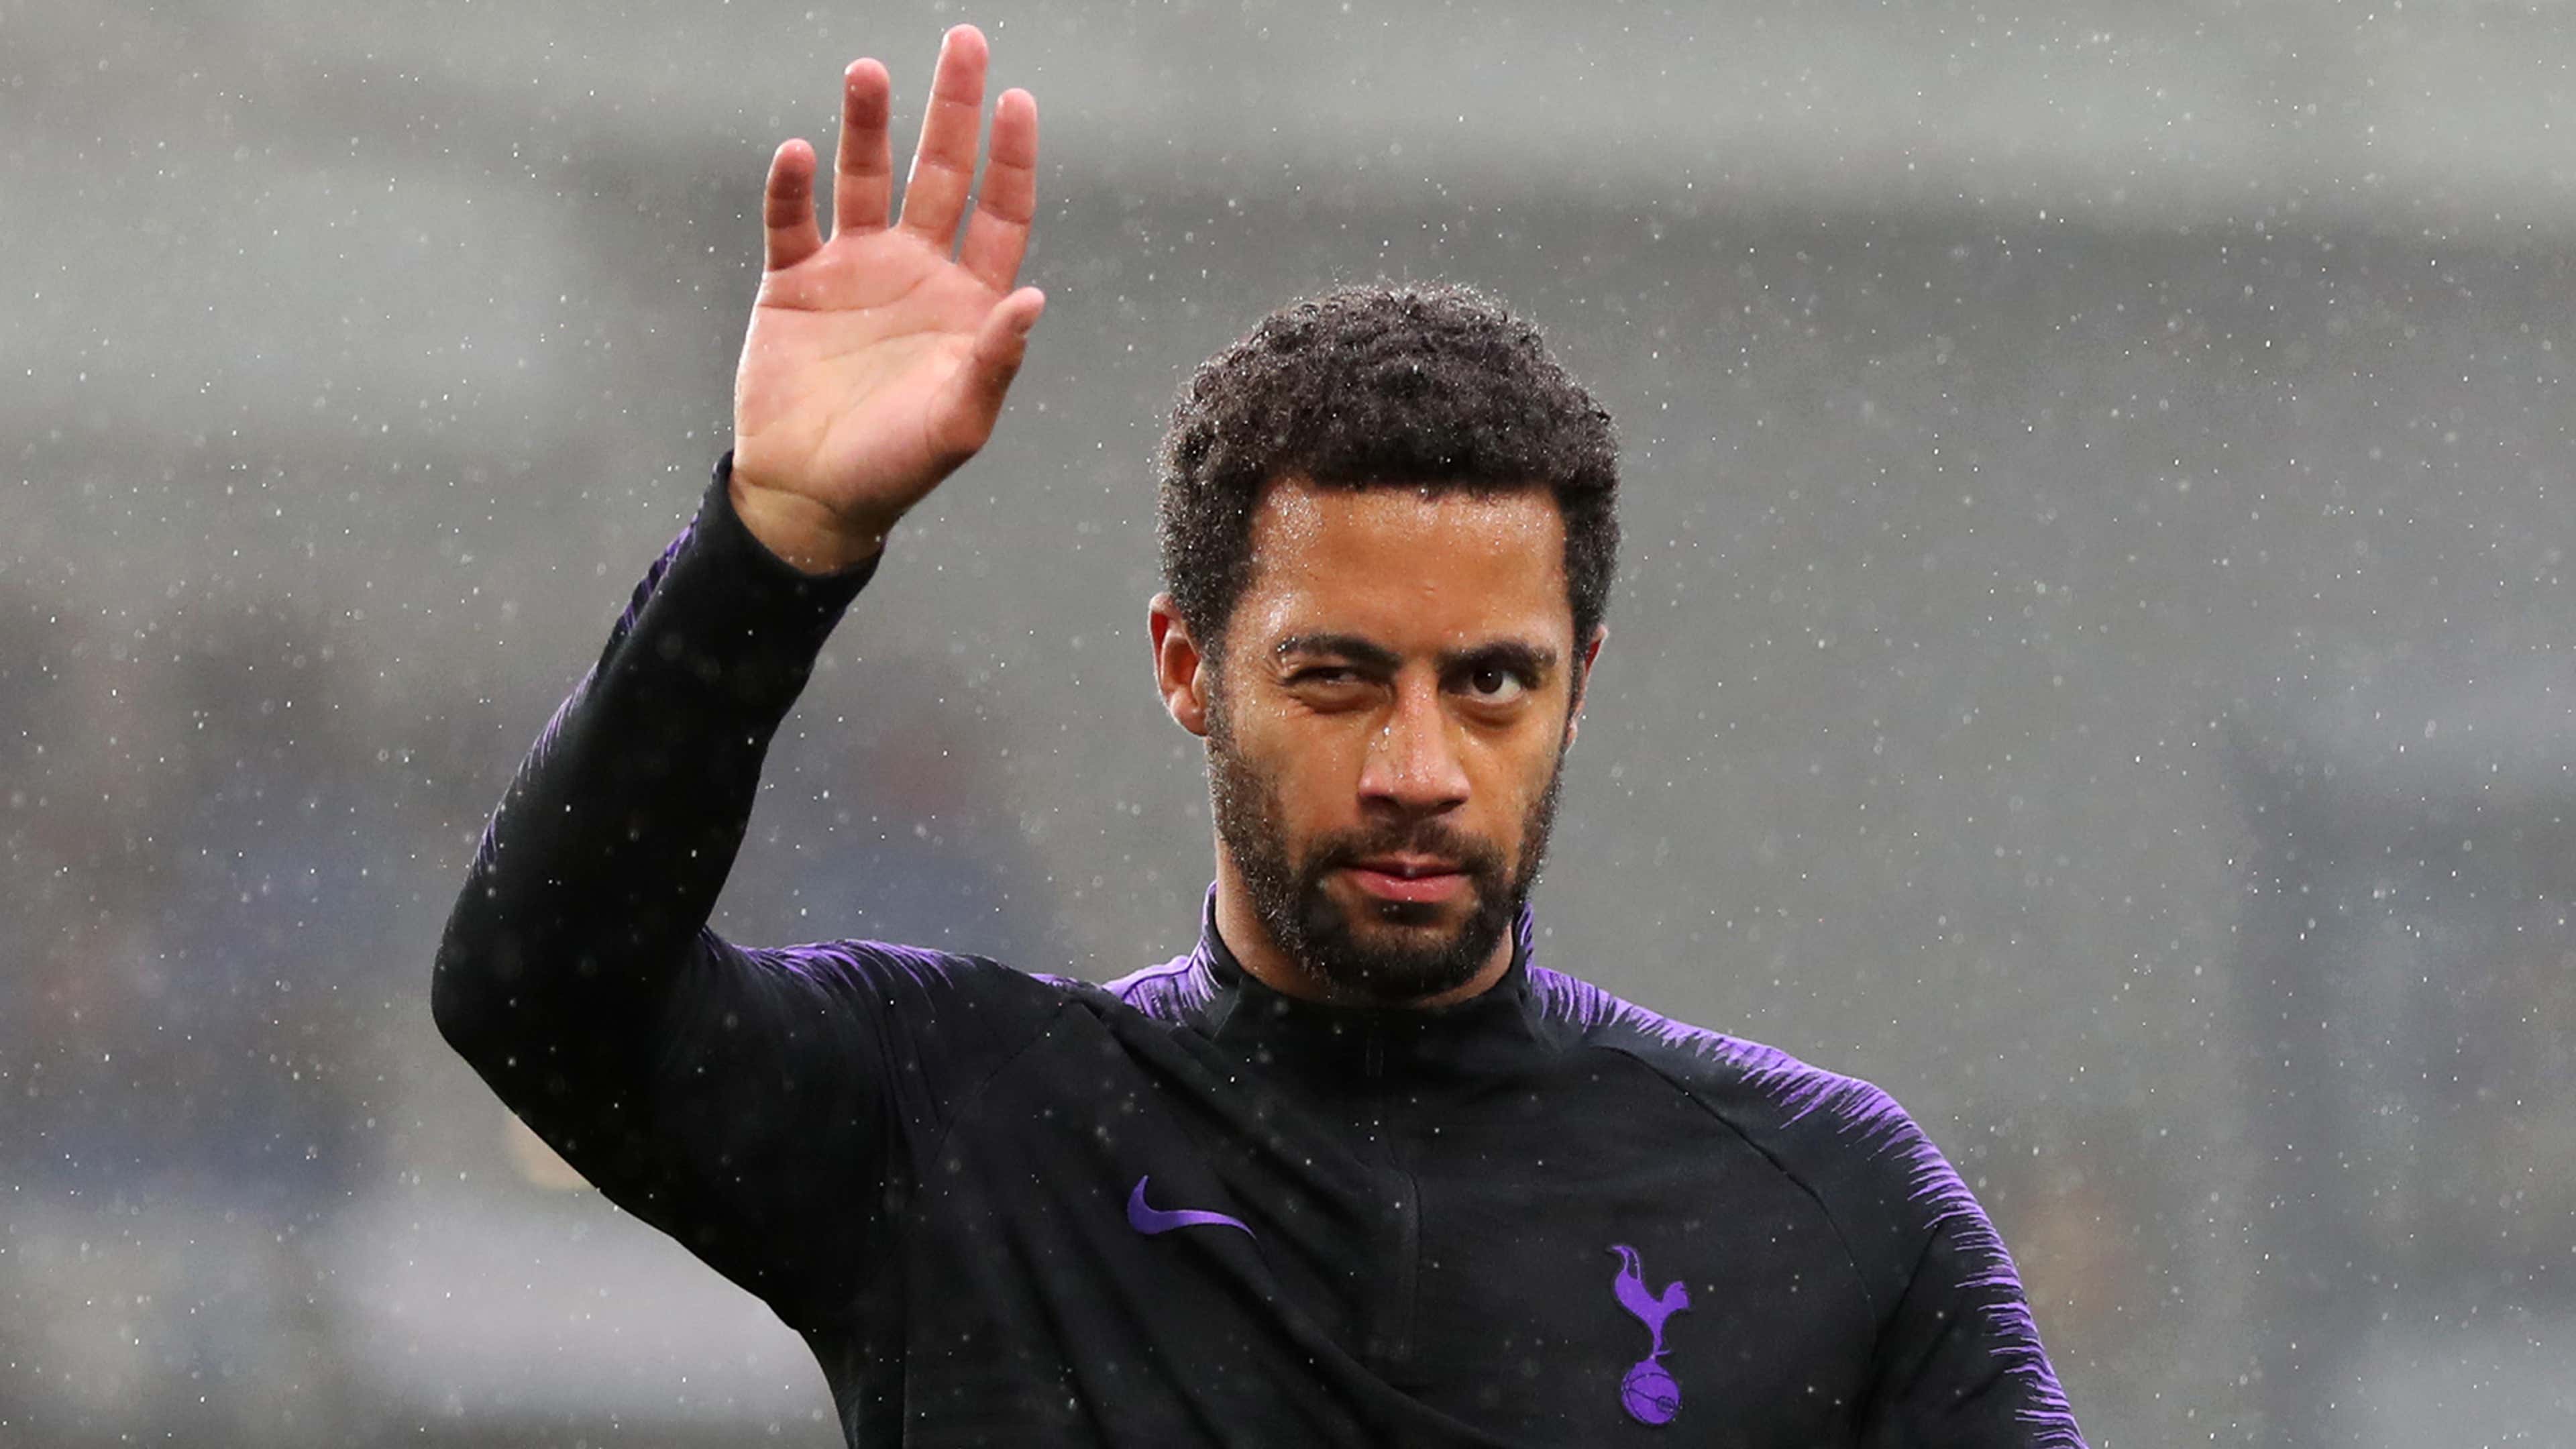 Transfer news: Tottenham reach £11m agreement with Guangzhou R&F for Dembele